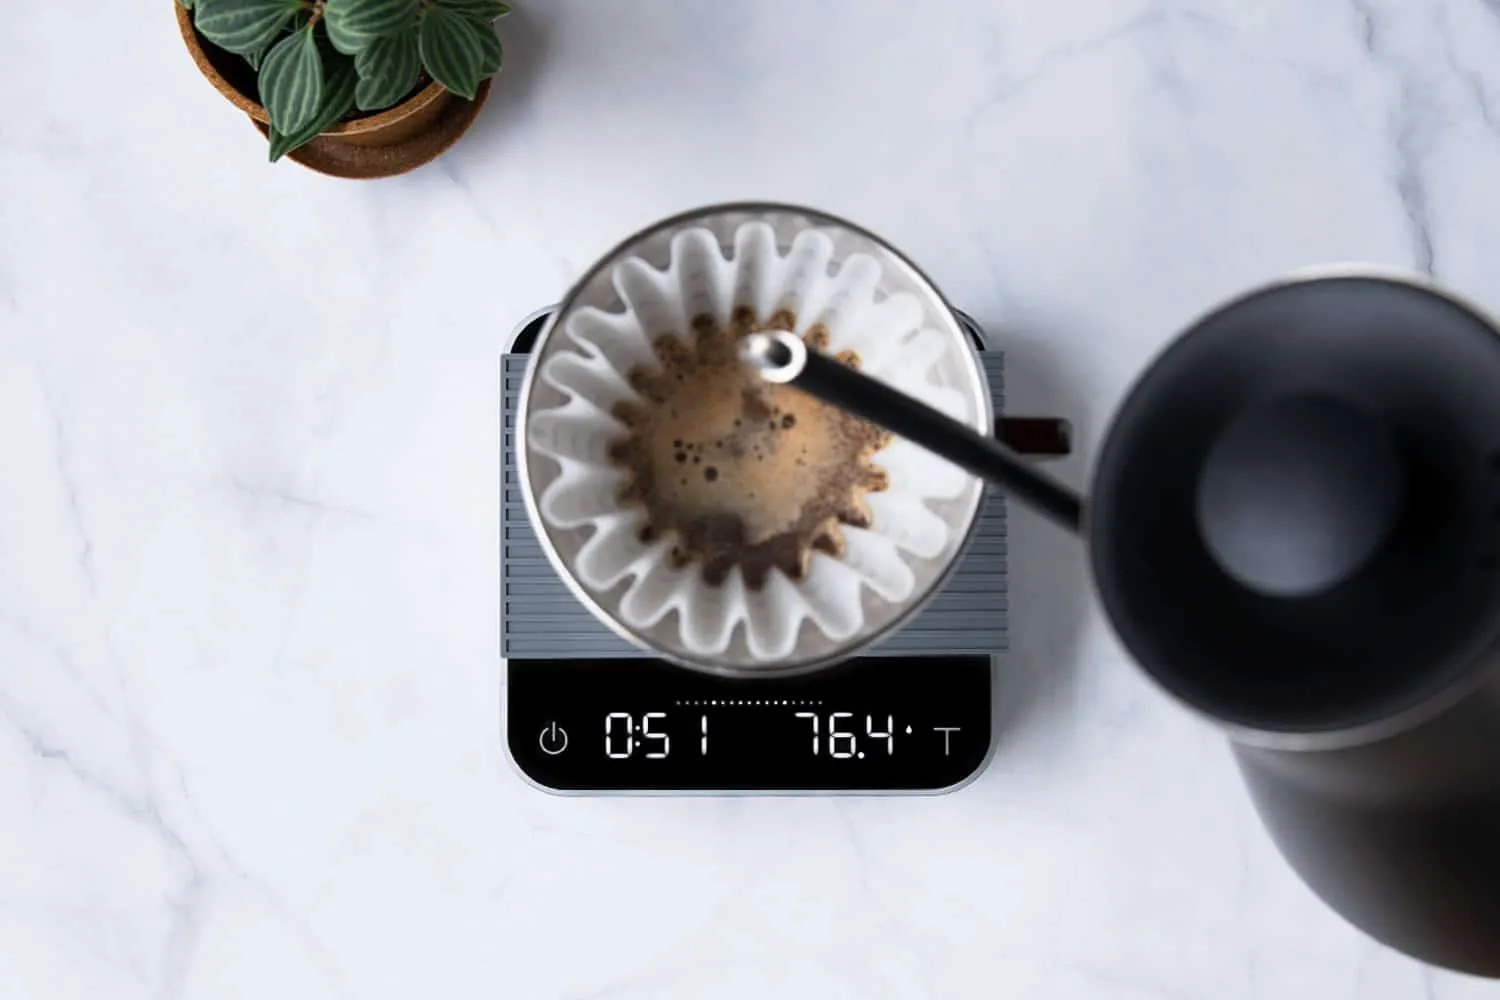 Acaia Pearl Scale Review: A $150 Coffee Scale You Don't Really Need